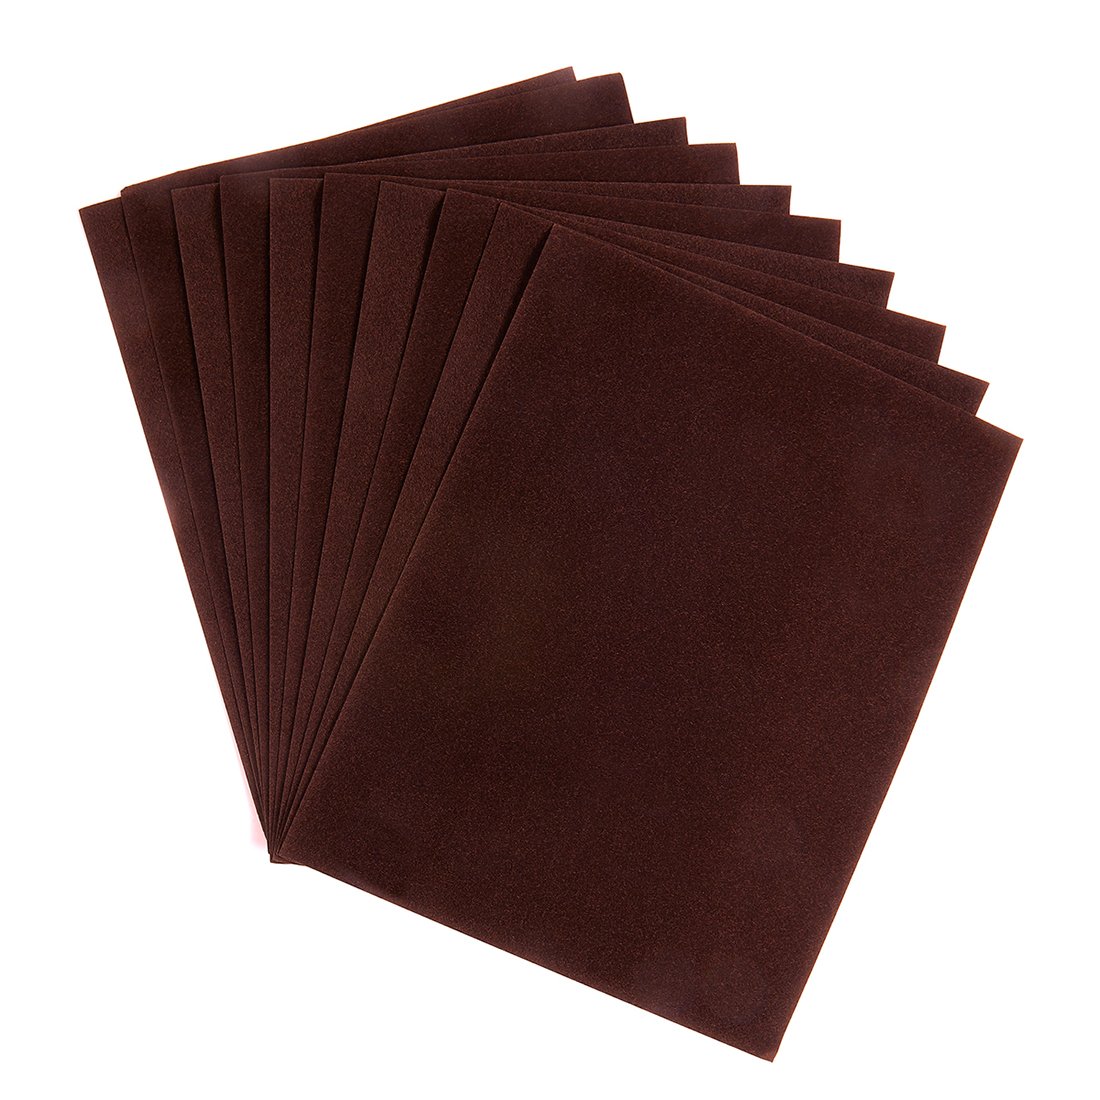 Hygloss Products Velour Paper - Soft, Velvety Surface Works With Printers – Brown, 8-1/2 x 11 Inches - 10 Pack